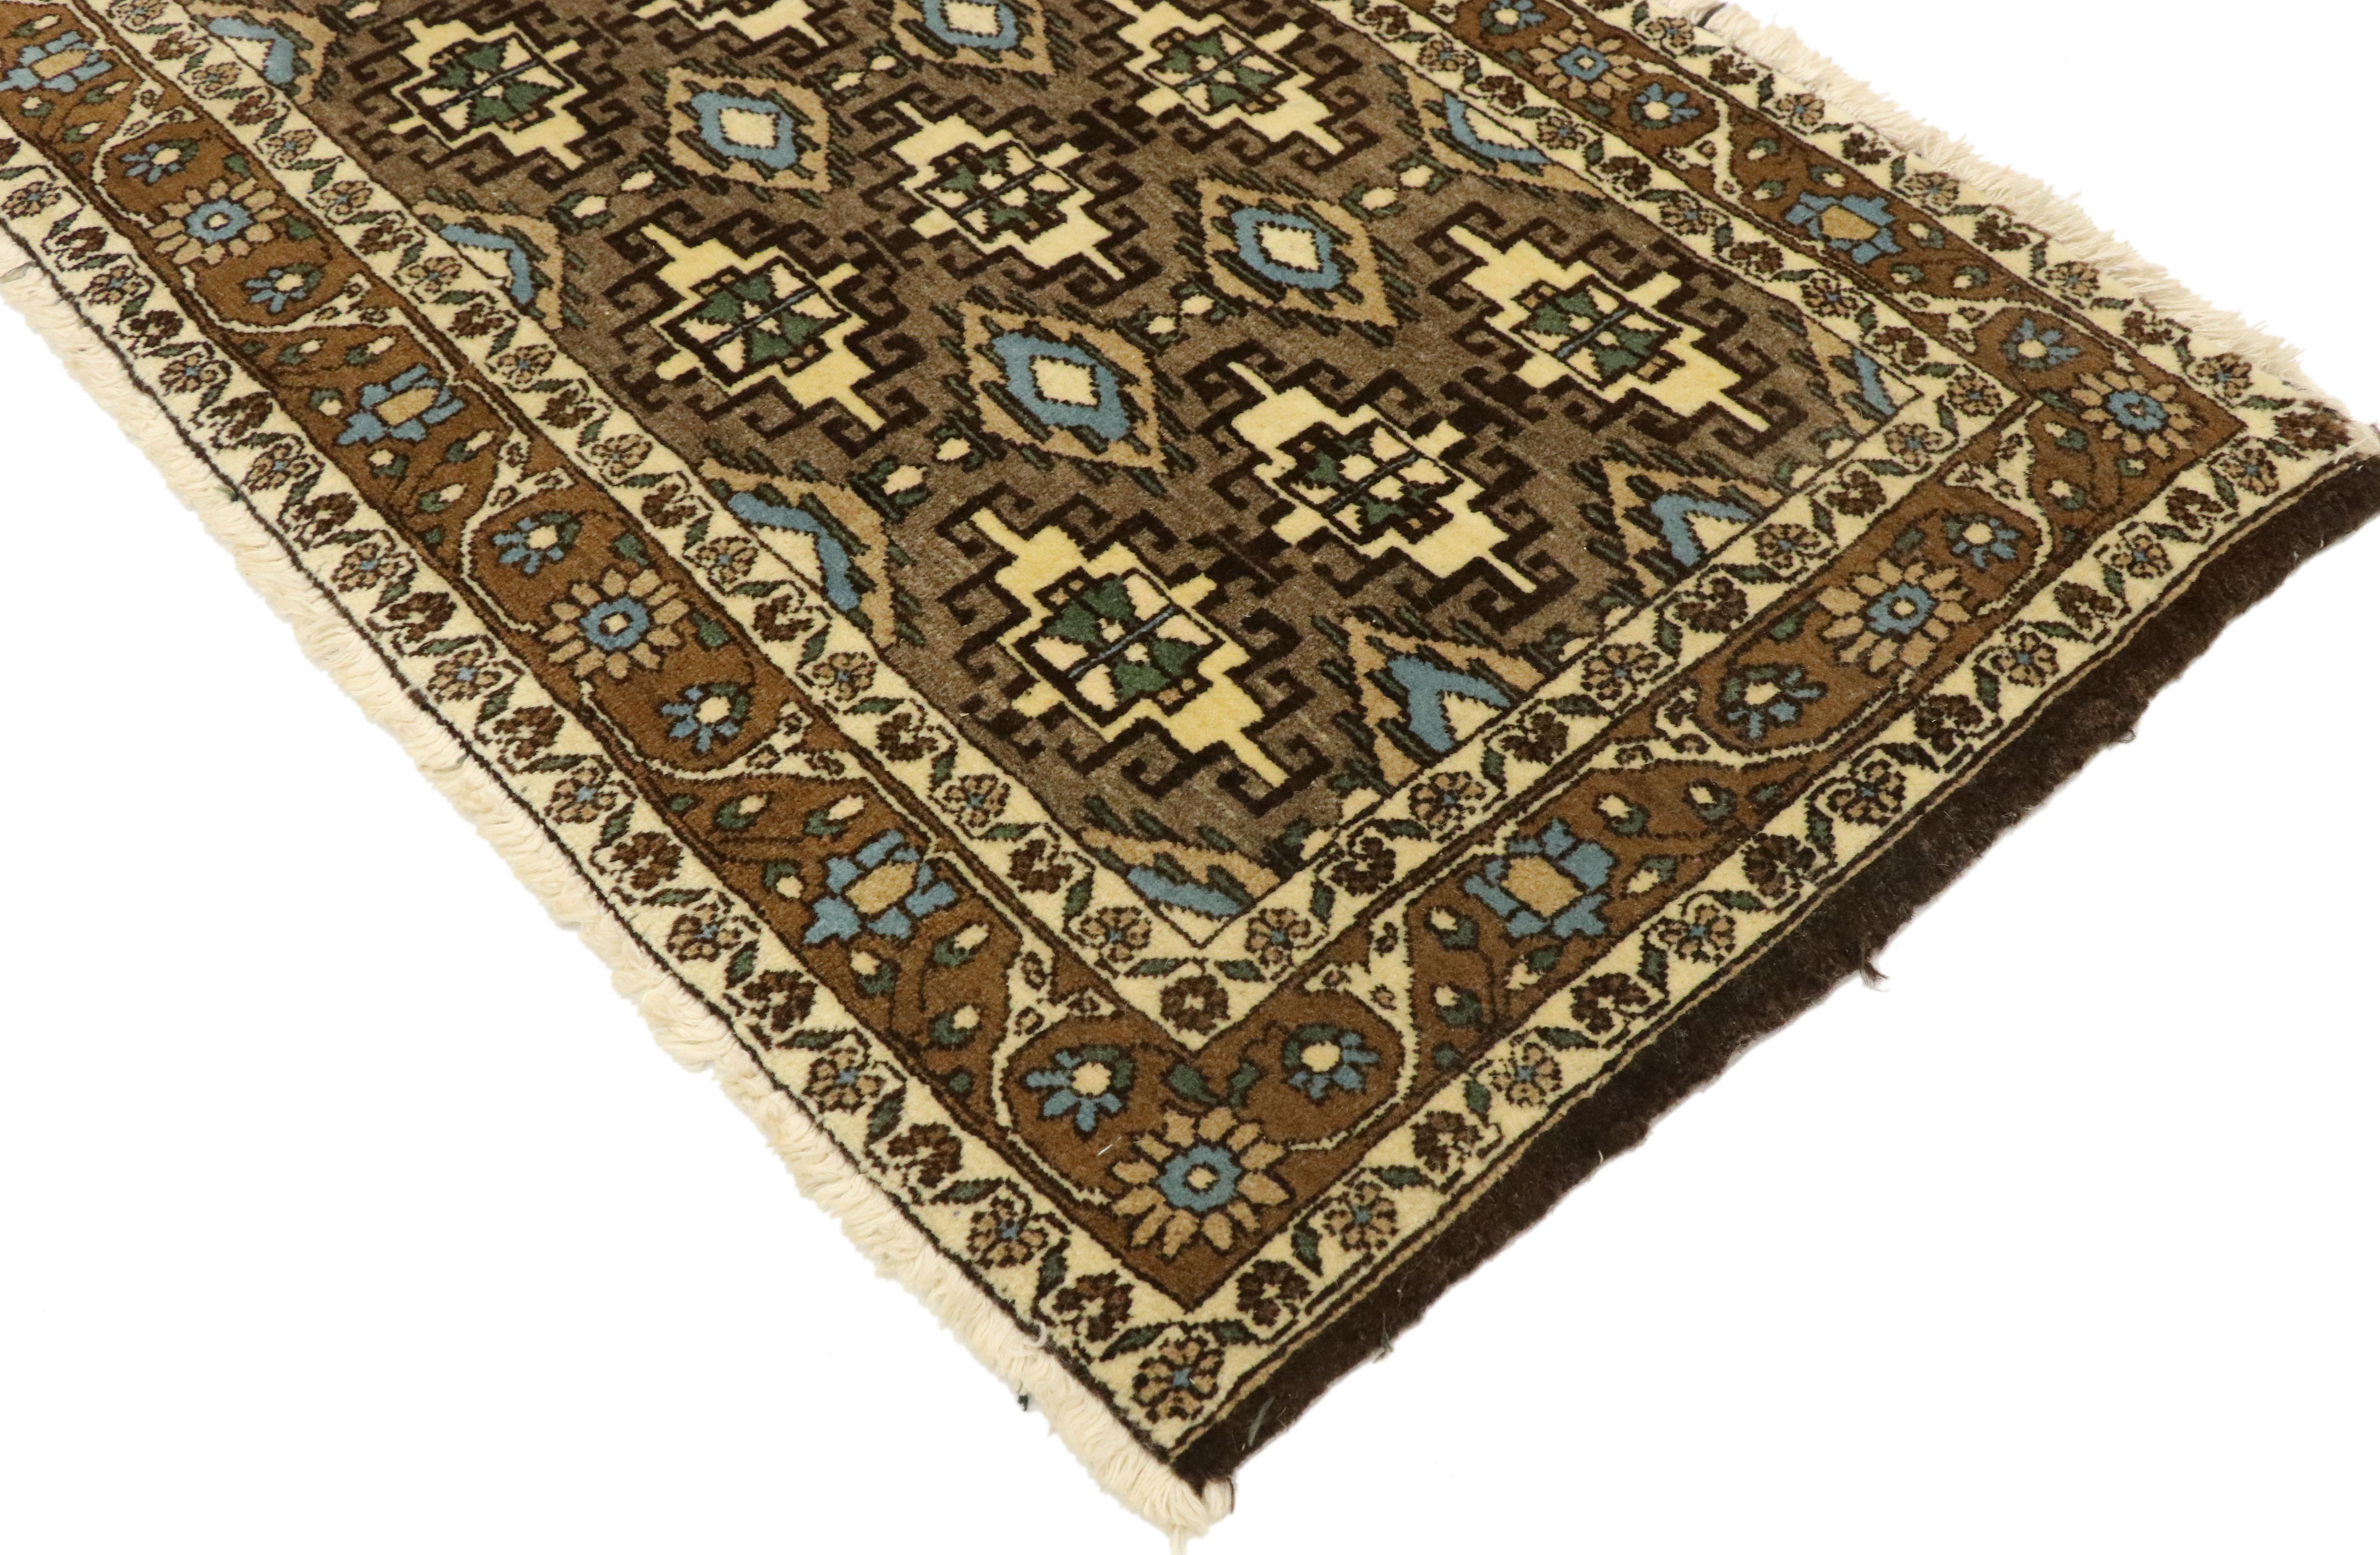 75165-75166, pair of matching vintage Persian Mashhad Scatter rugs with Mid-Century Modern style. With timeless appeal and Mid-Century Modern style, this matching pair of hand knotted wool vintage Persian Mashhad scatter rugs can beautifully blend